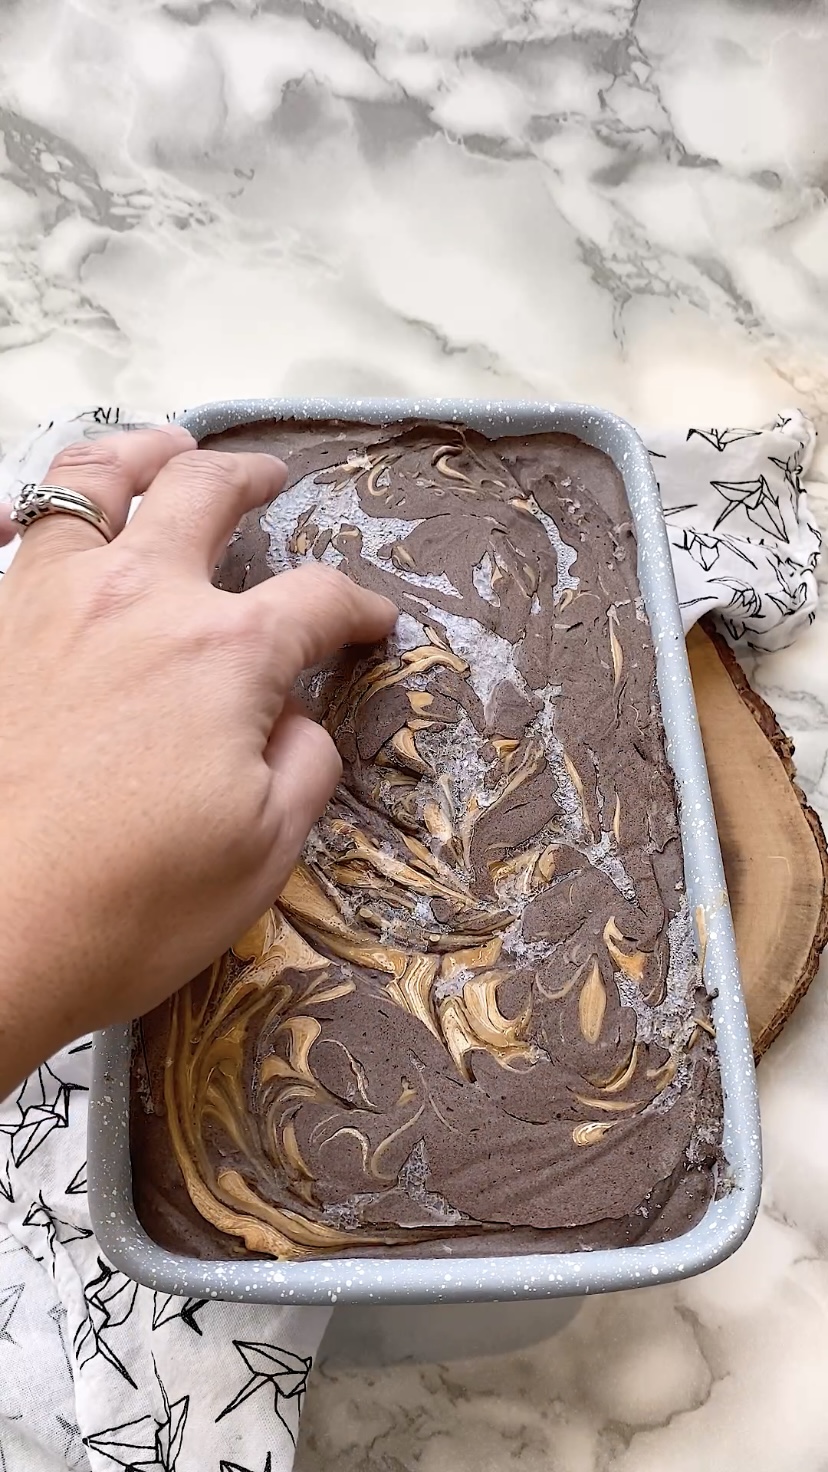 Chocolate peanut butter ice cream in a loaf pan.